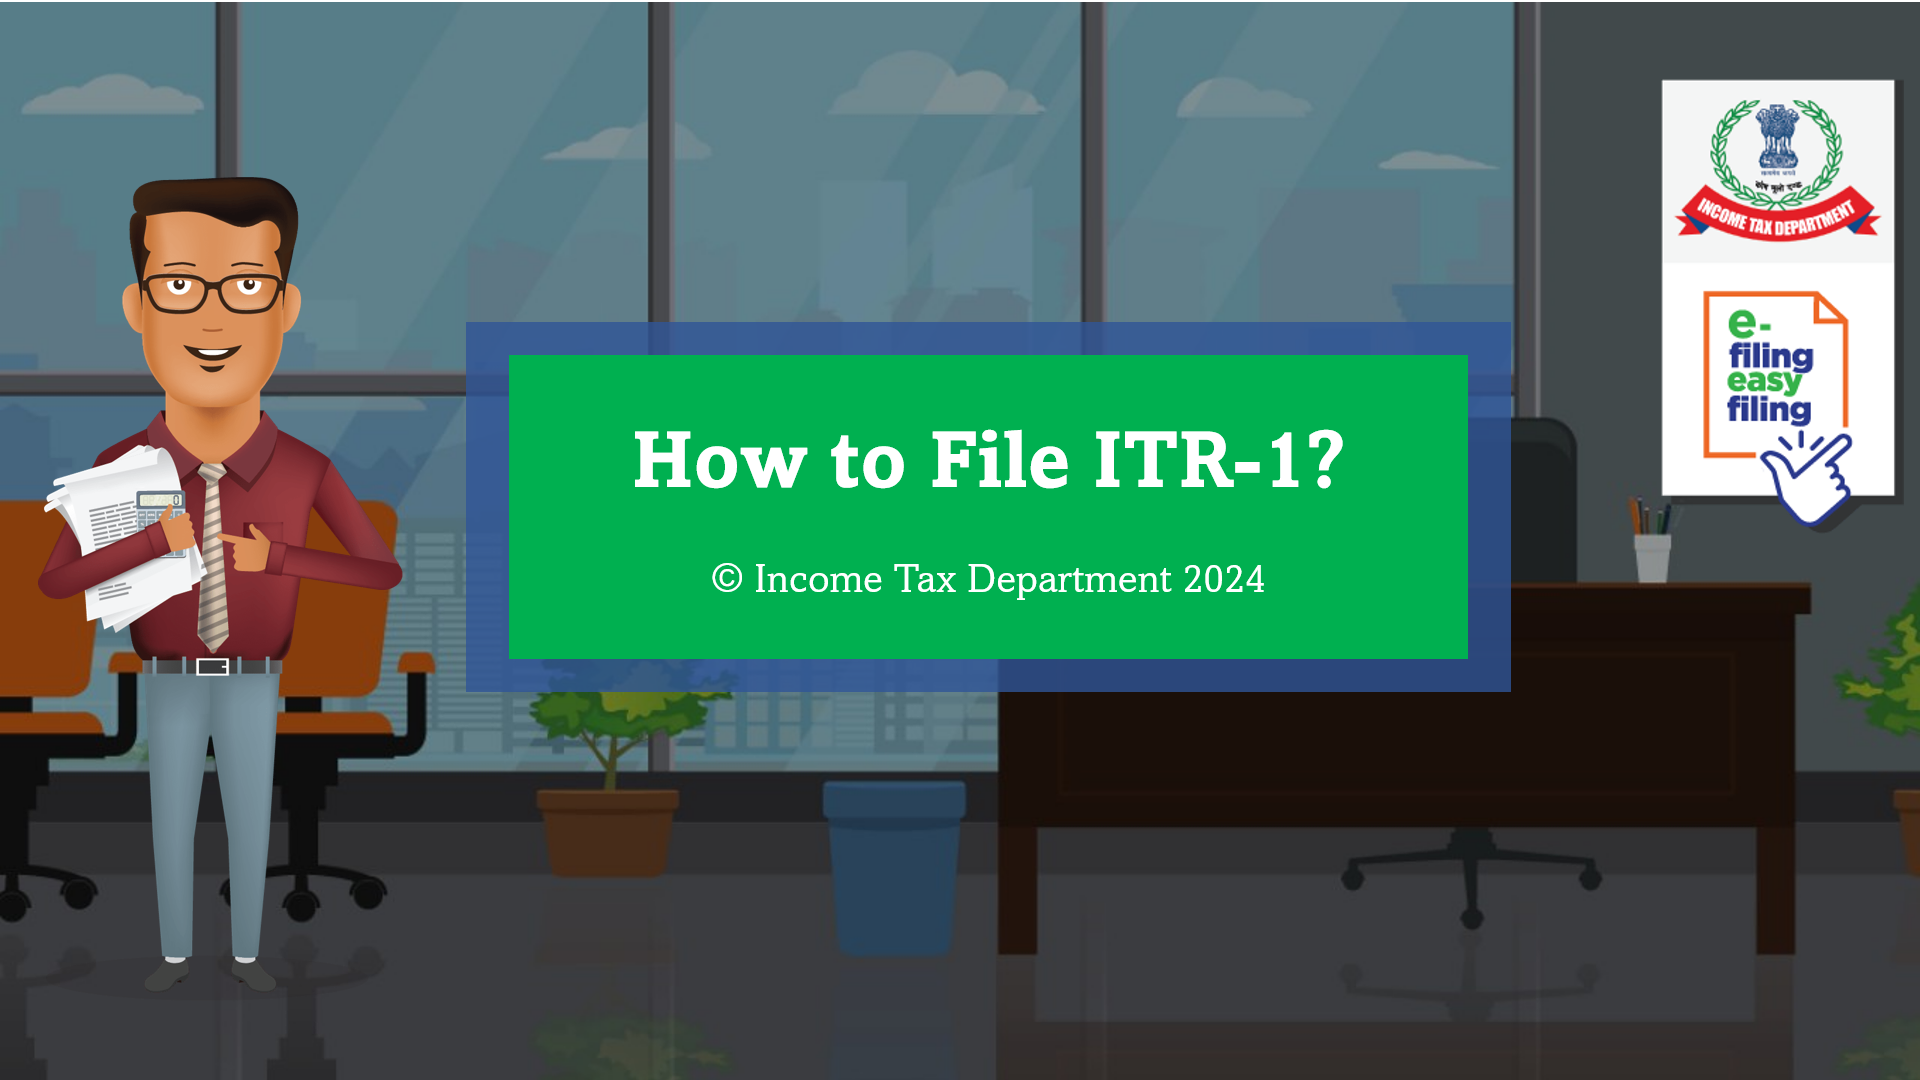 How to file ITR 1?